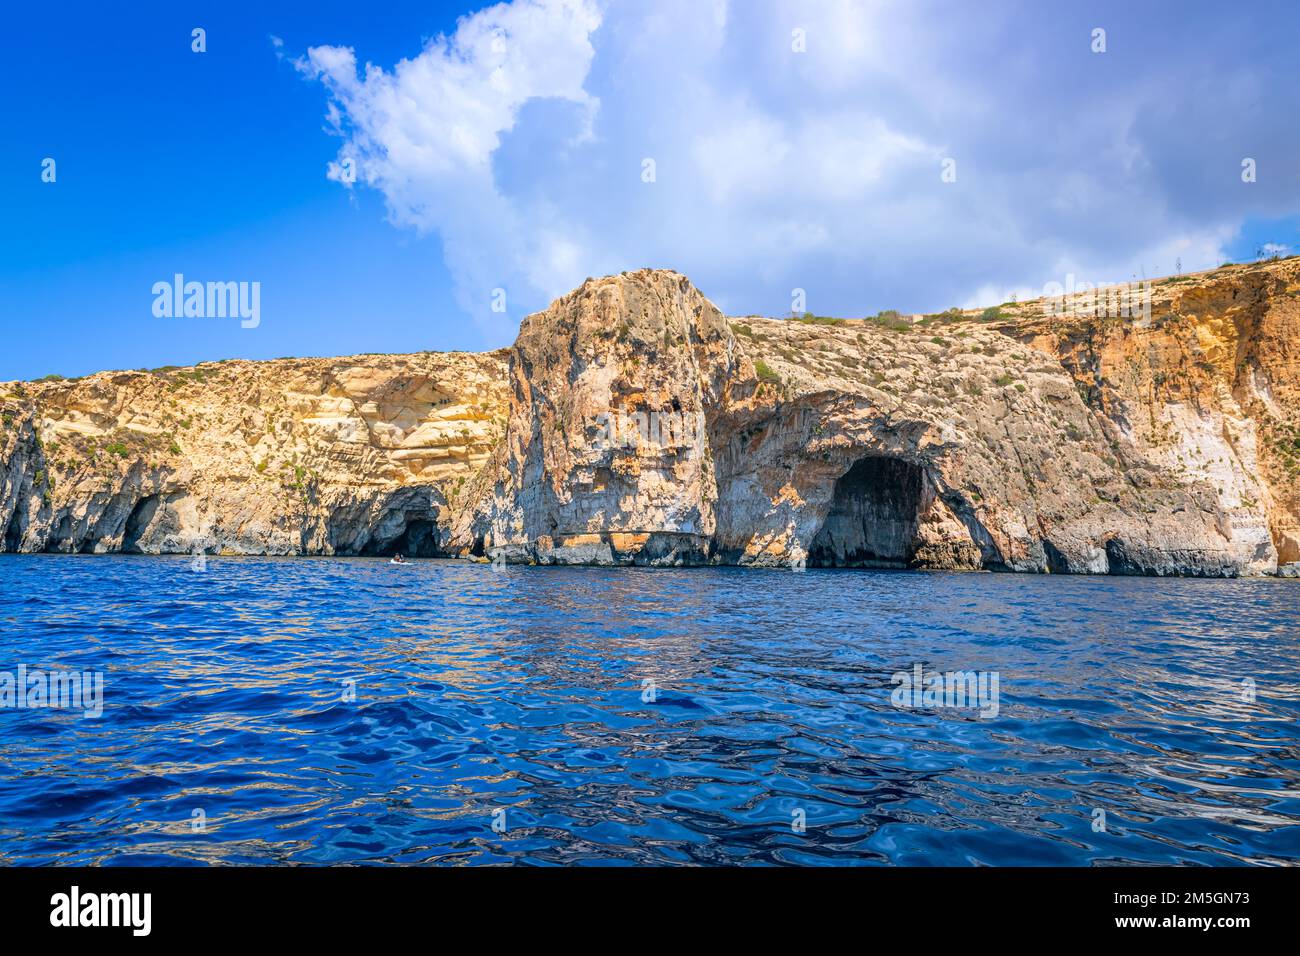 Blue Grotto in Malta.  The sea cave is located near Wied iż-Żurrieq south of Żurrieq in the southwest of the island of Malta. Stock Photo